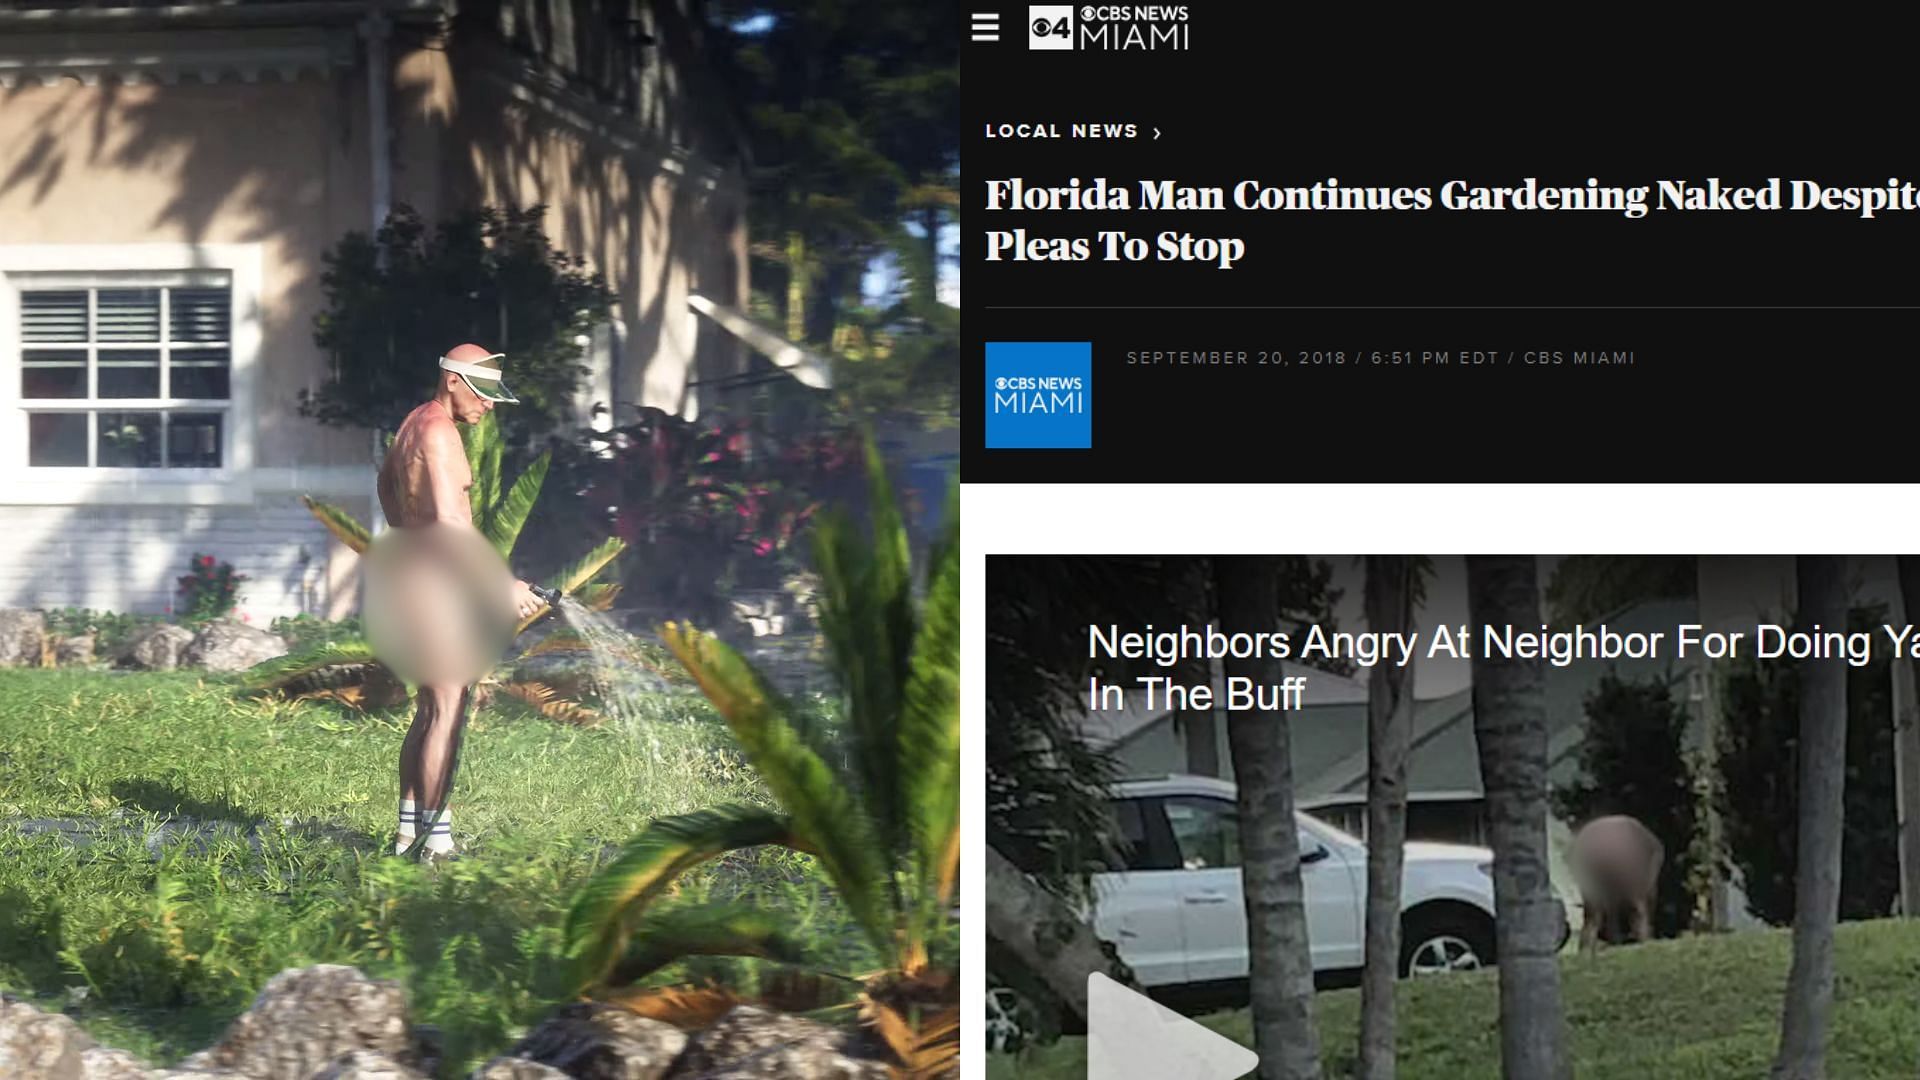 The naked gardening man depicted in the trailer (Images via Rockstar Games, CBS News Miami)